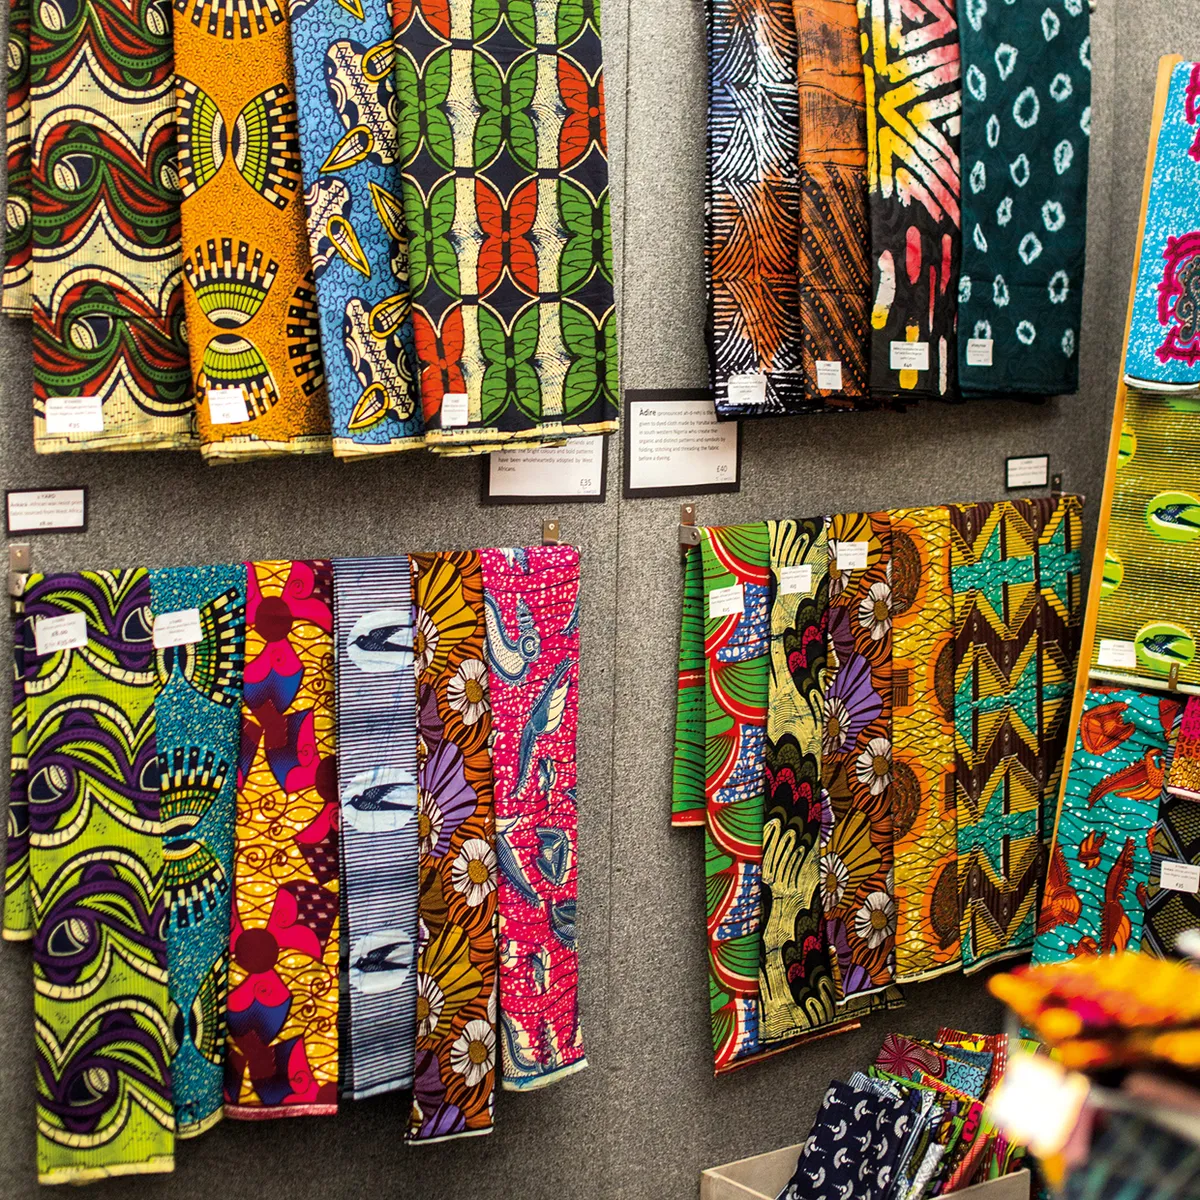 Urbanstax at the Knitting & Stitching Show4- Benedetto Photos